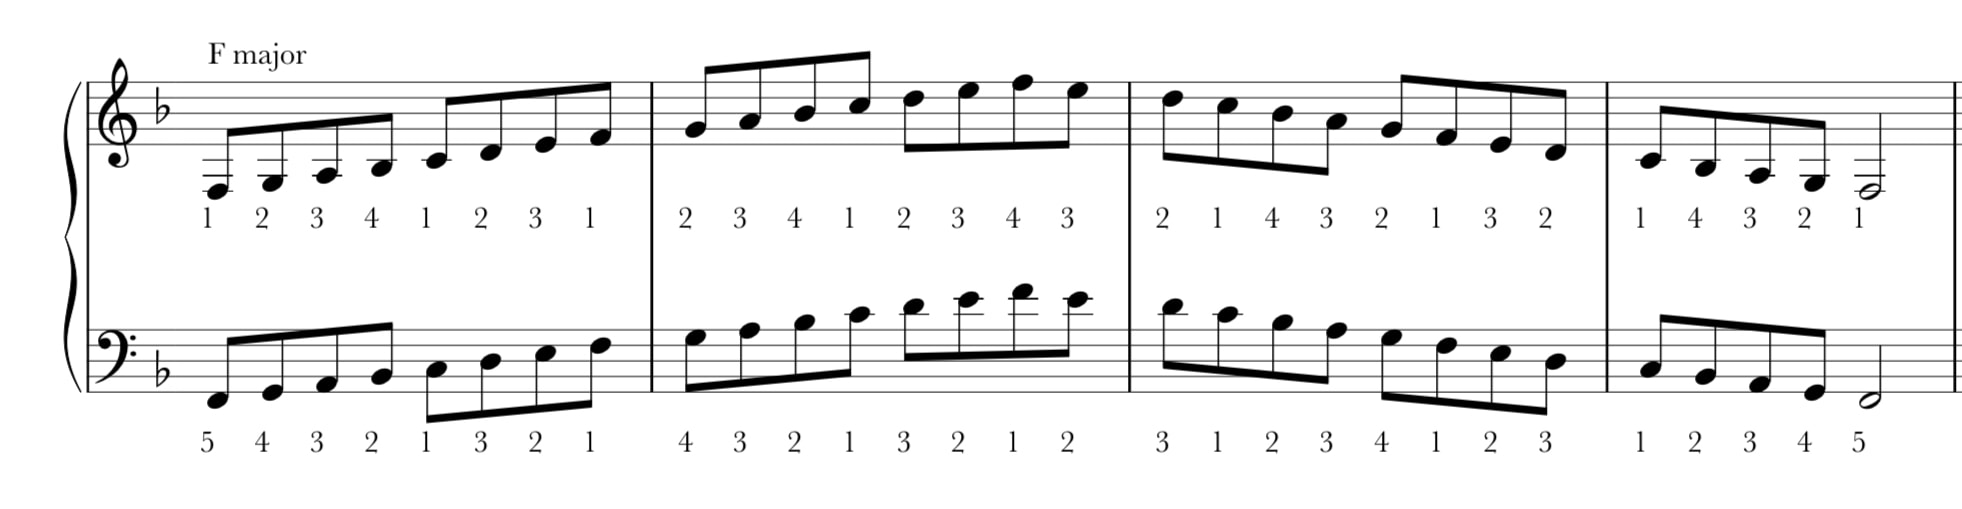 Picture of sheet music for F major scale, two octaves on the piano